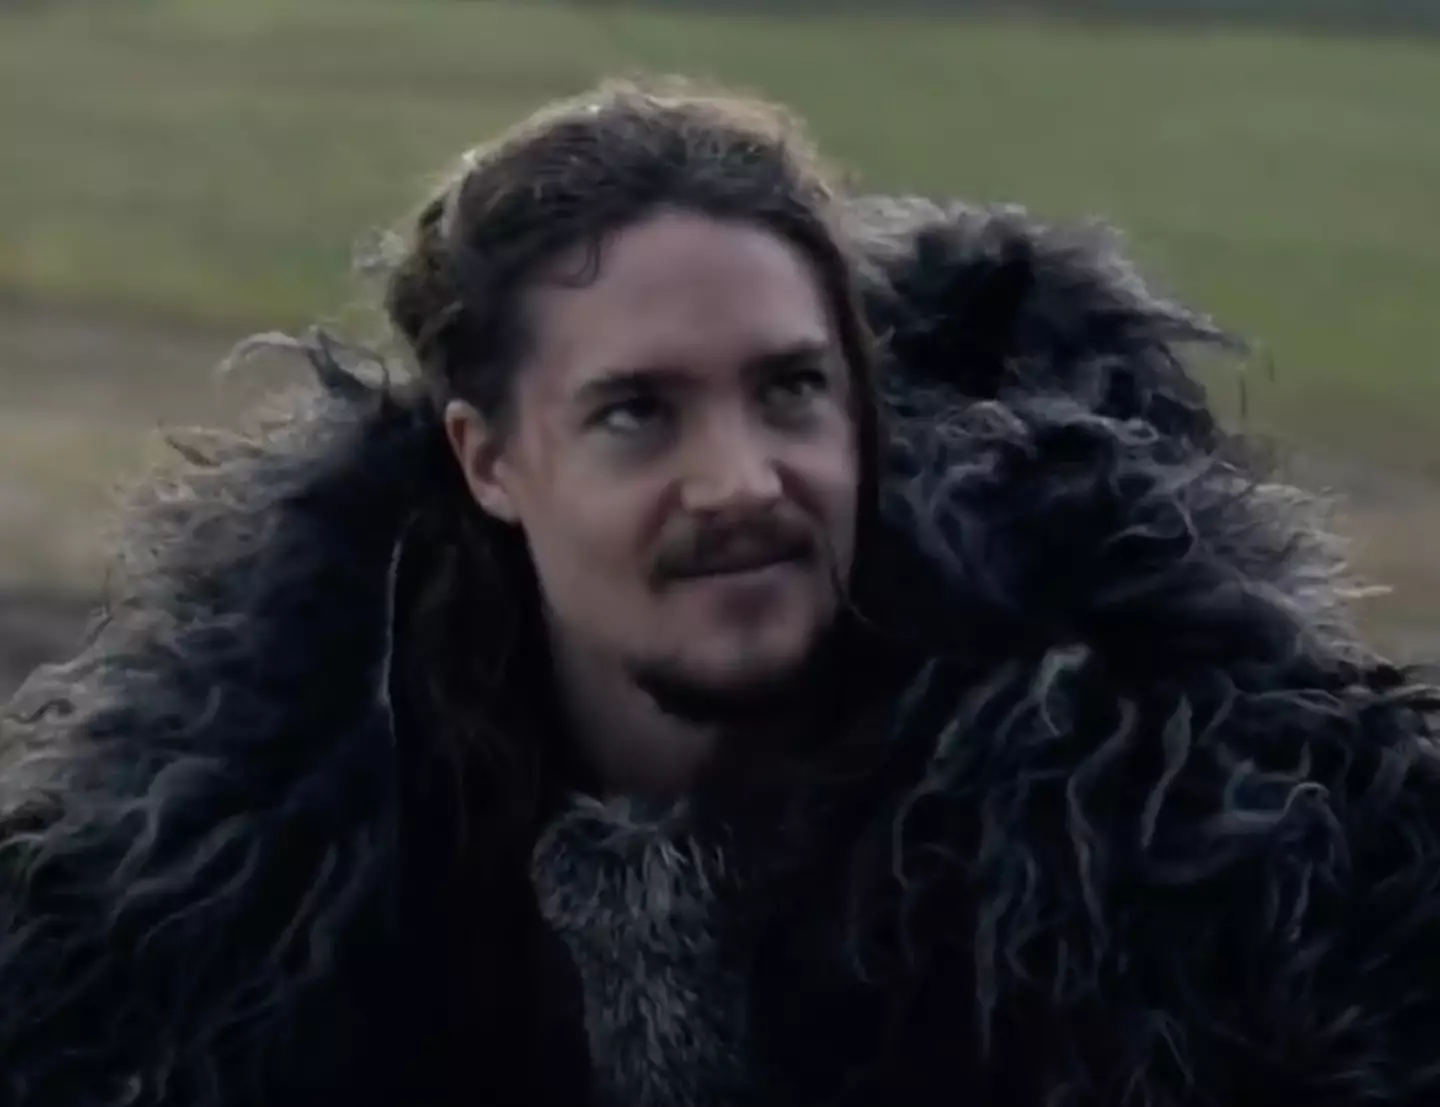 The Last Kingdom is being called 'one of the best series in history'.